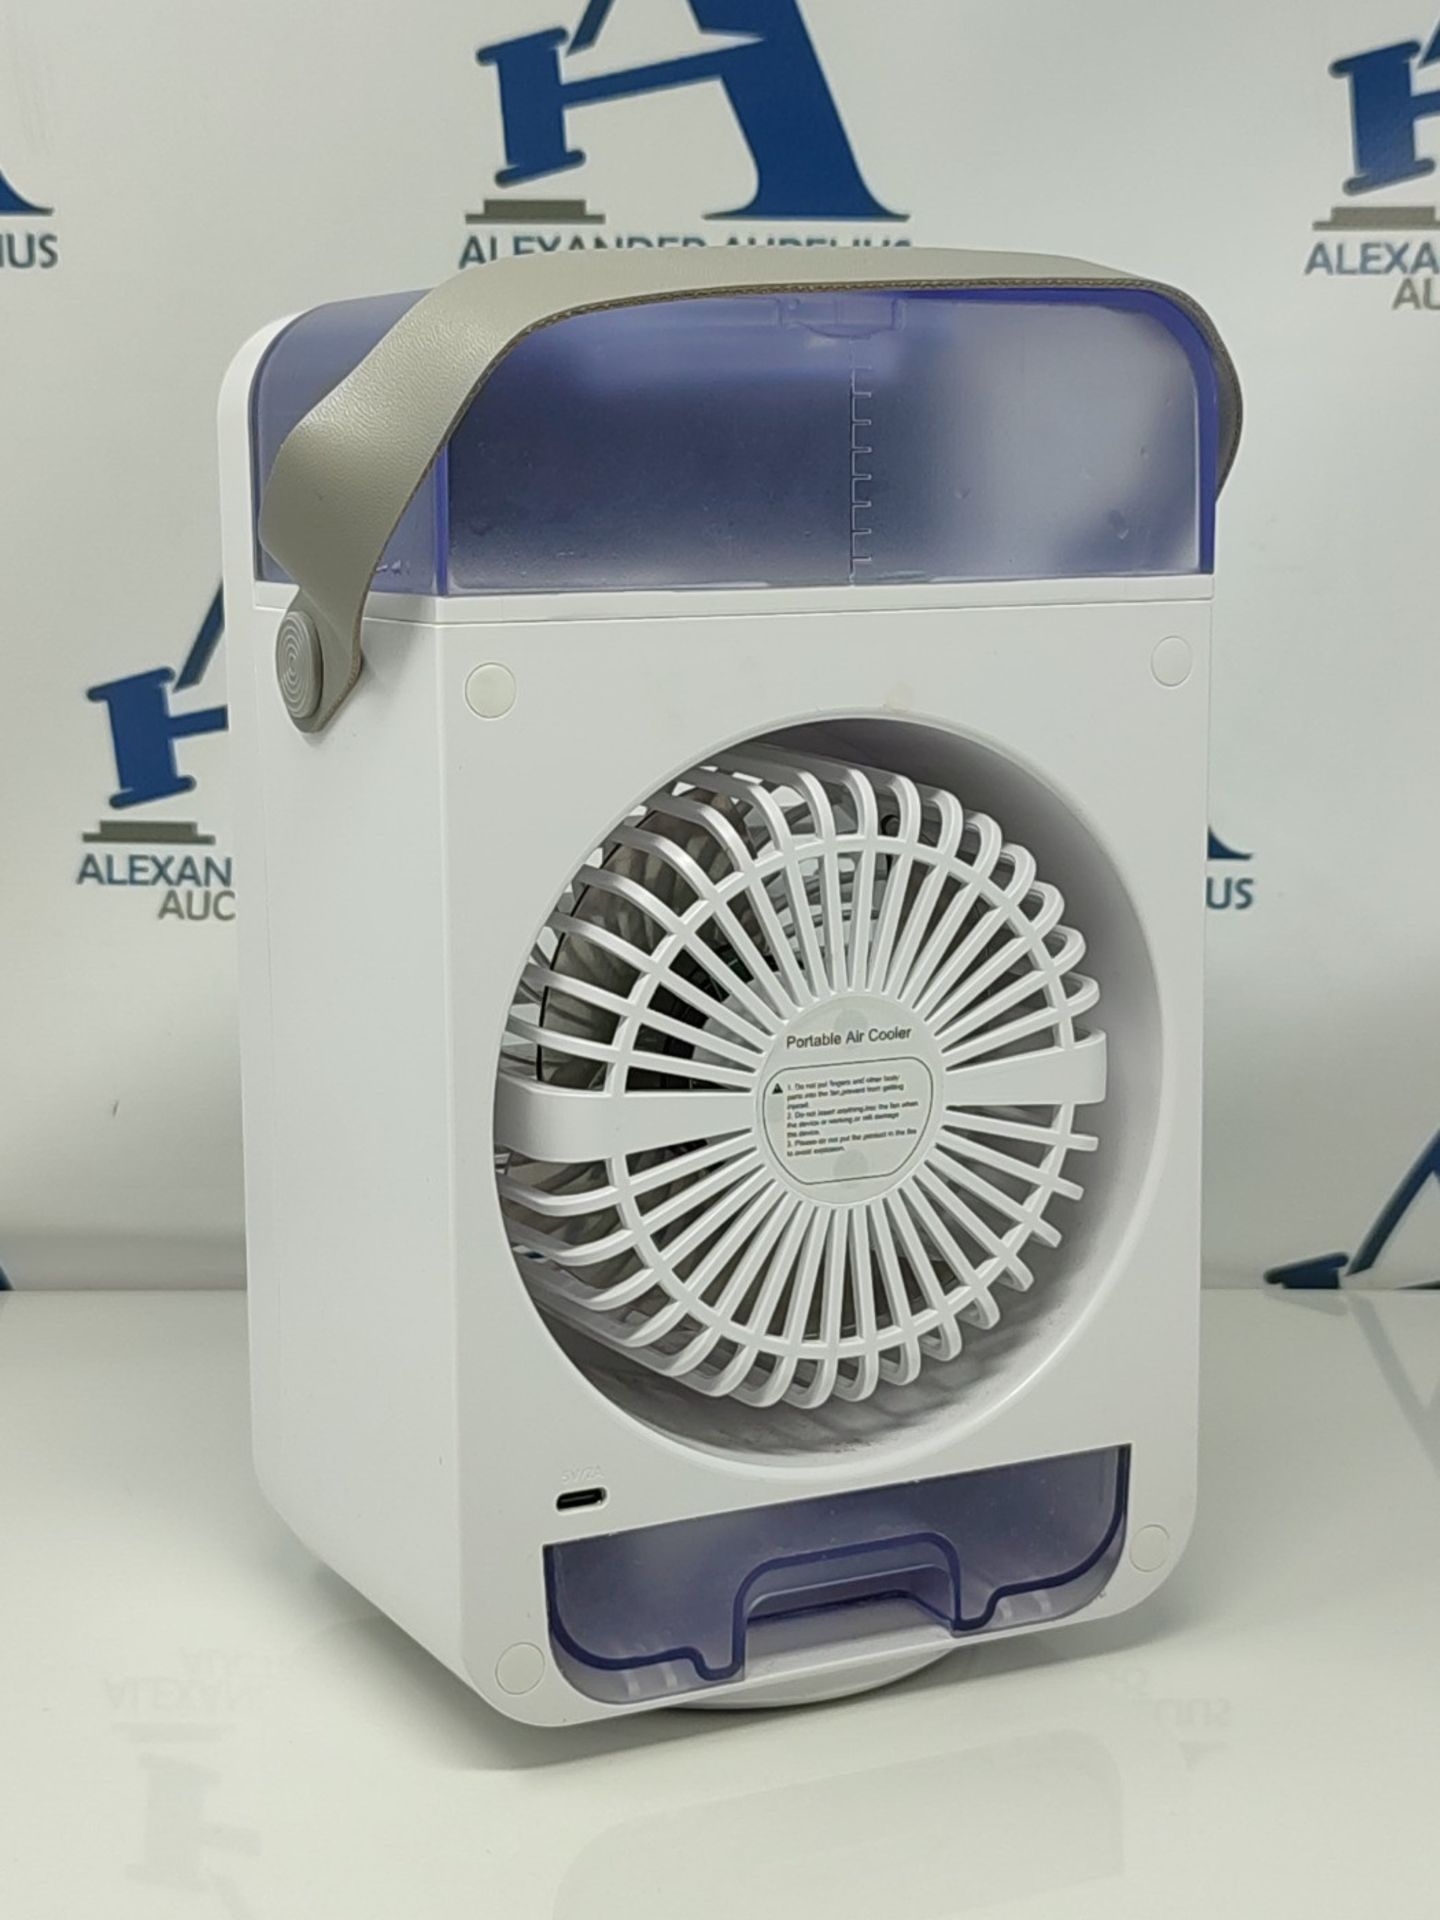 Air Coolers for Home, ZASTION Portable Air Conditioner 4 in 1 Mini Evaporative Cooler - Image 3 of 3